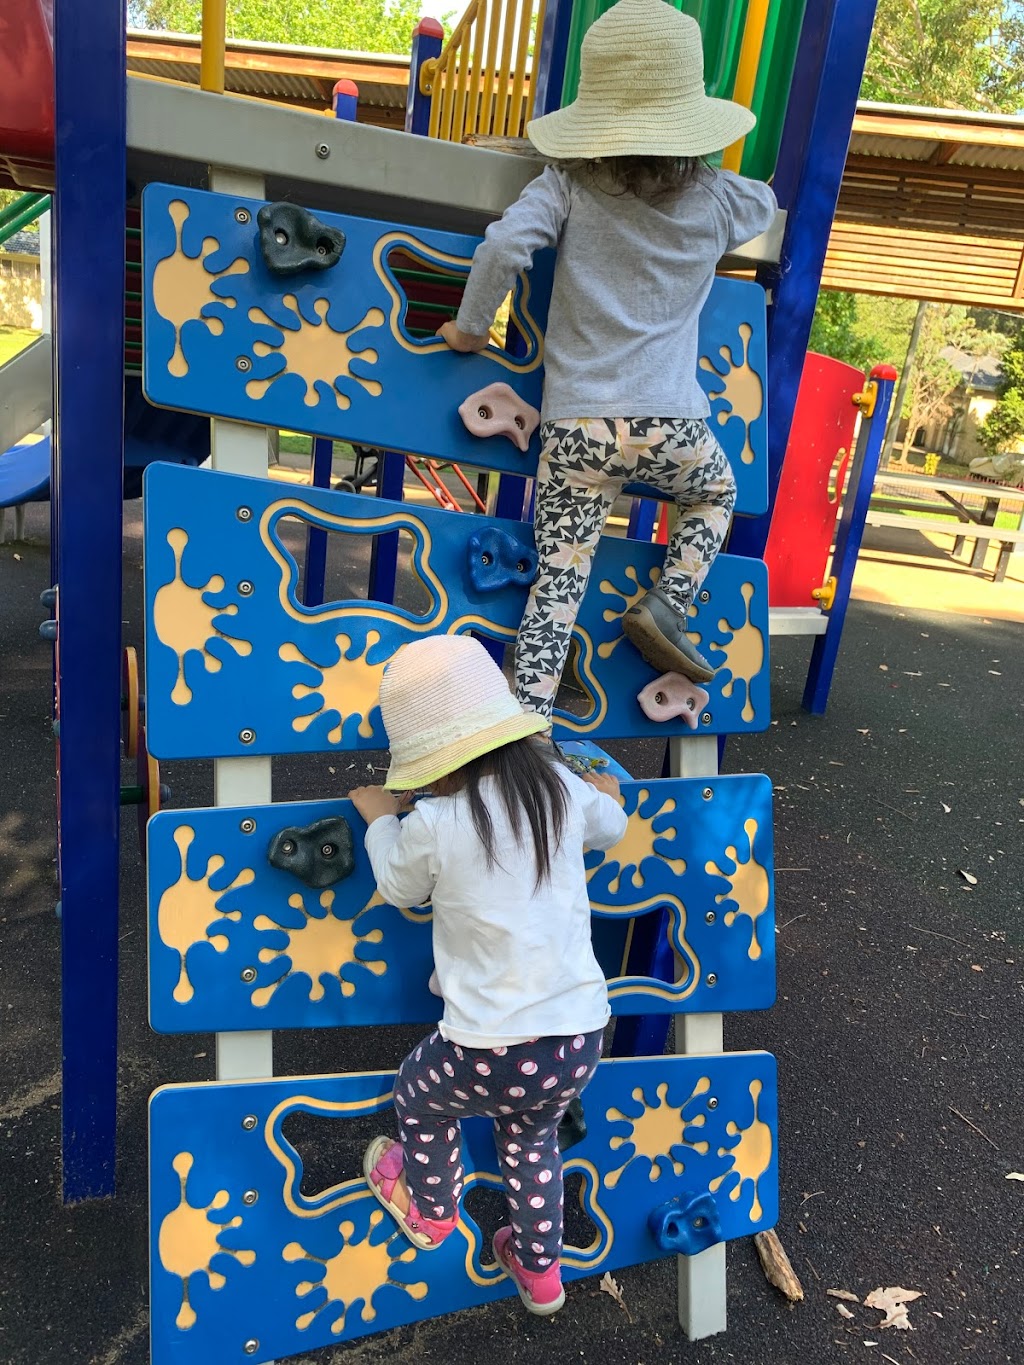 Carlingford Family Day Care |  | Keats St, Carlingford NSW 2118, Australia | 0415499741 OR +61 415 499 741